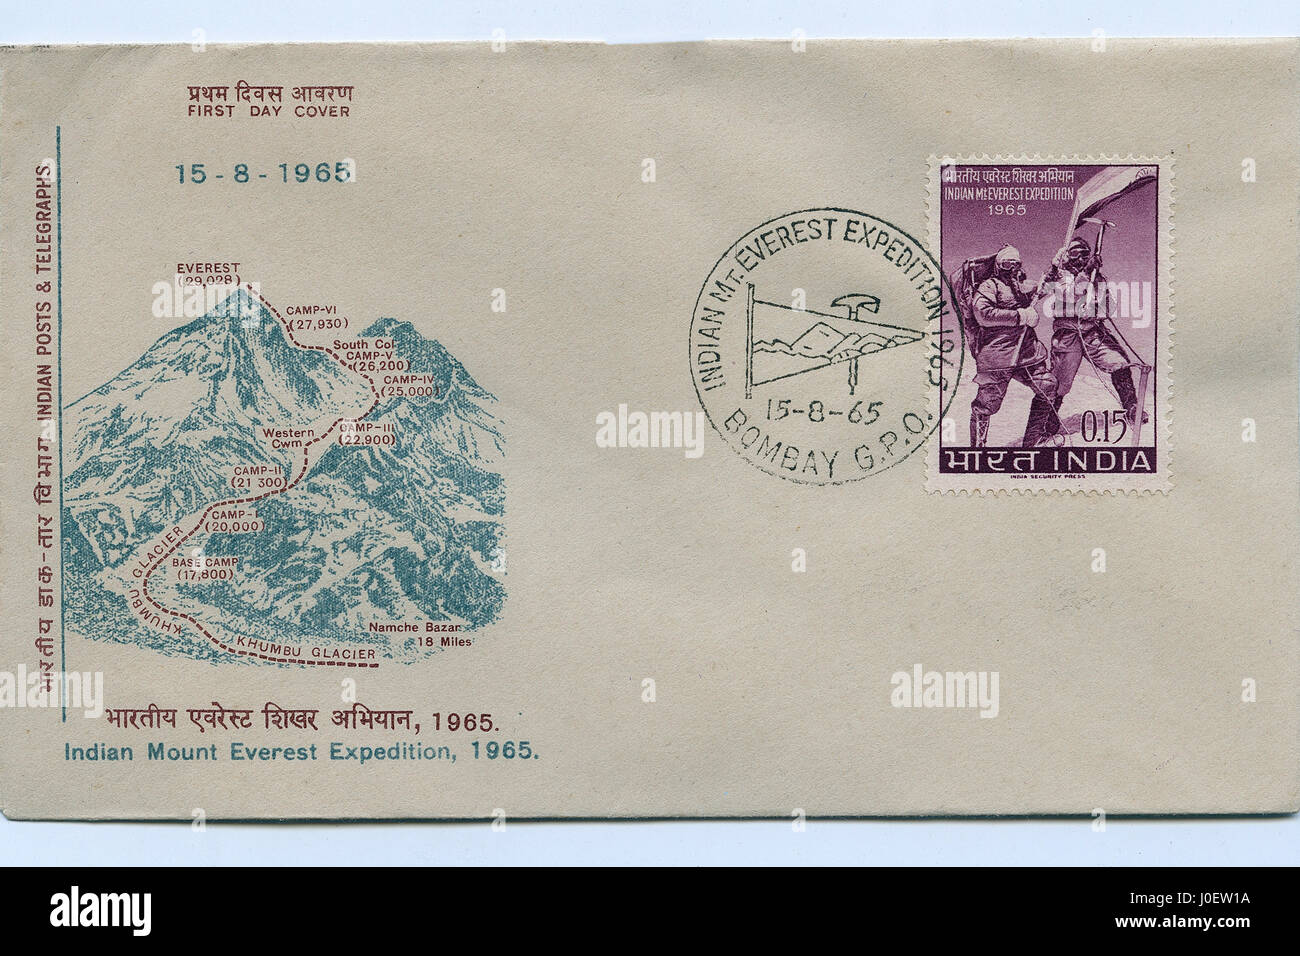 First day cover of mount everest expedition, india, asia Stock Photo